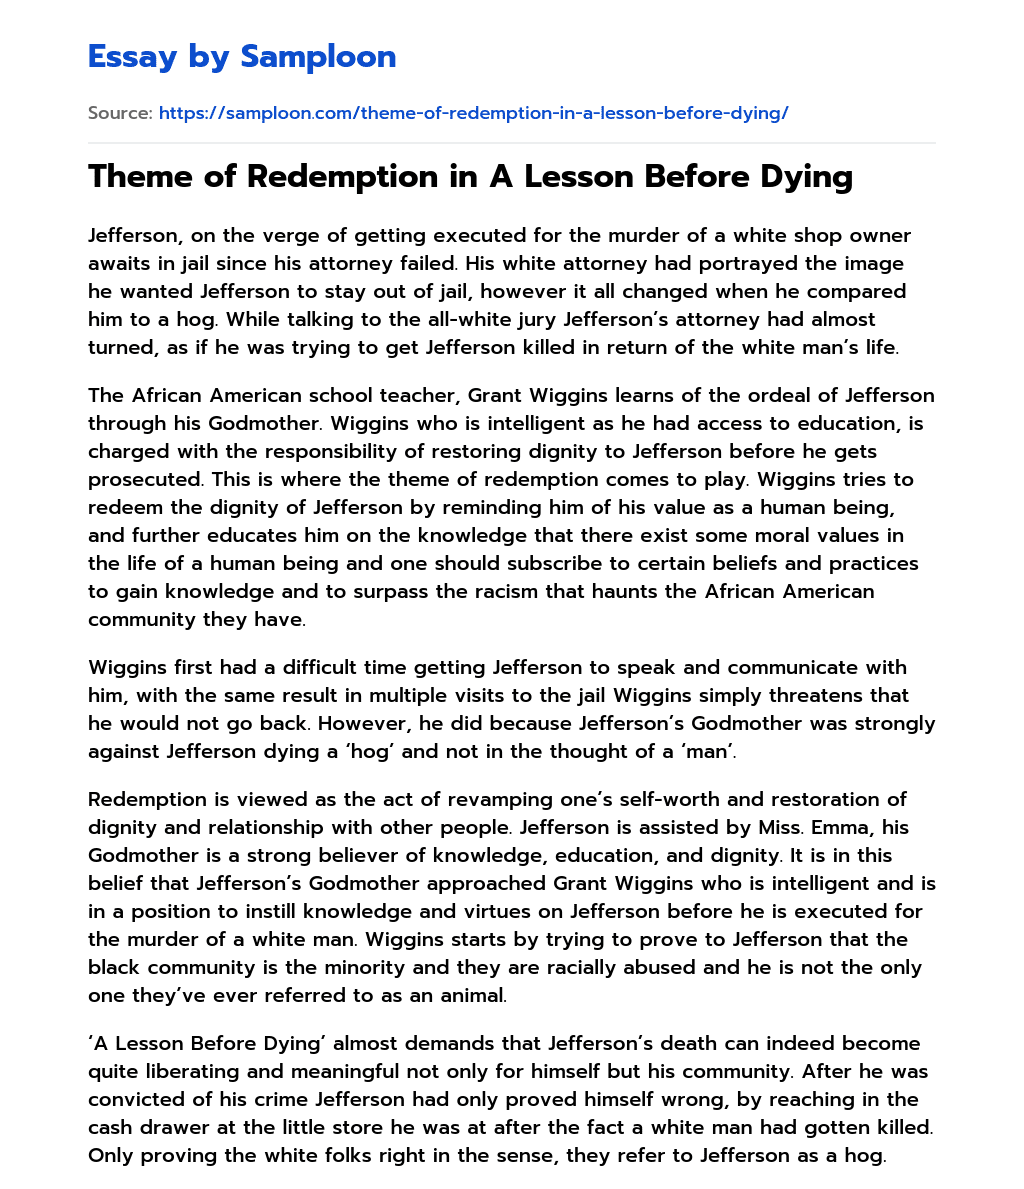 Theme of Redemption in A Lesson Before Dying essay